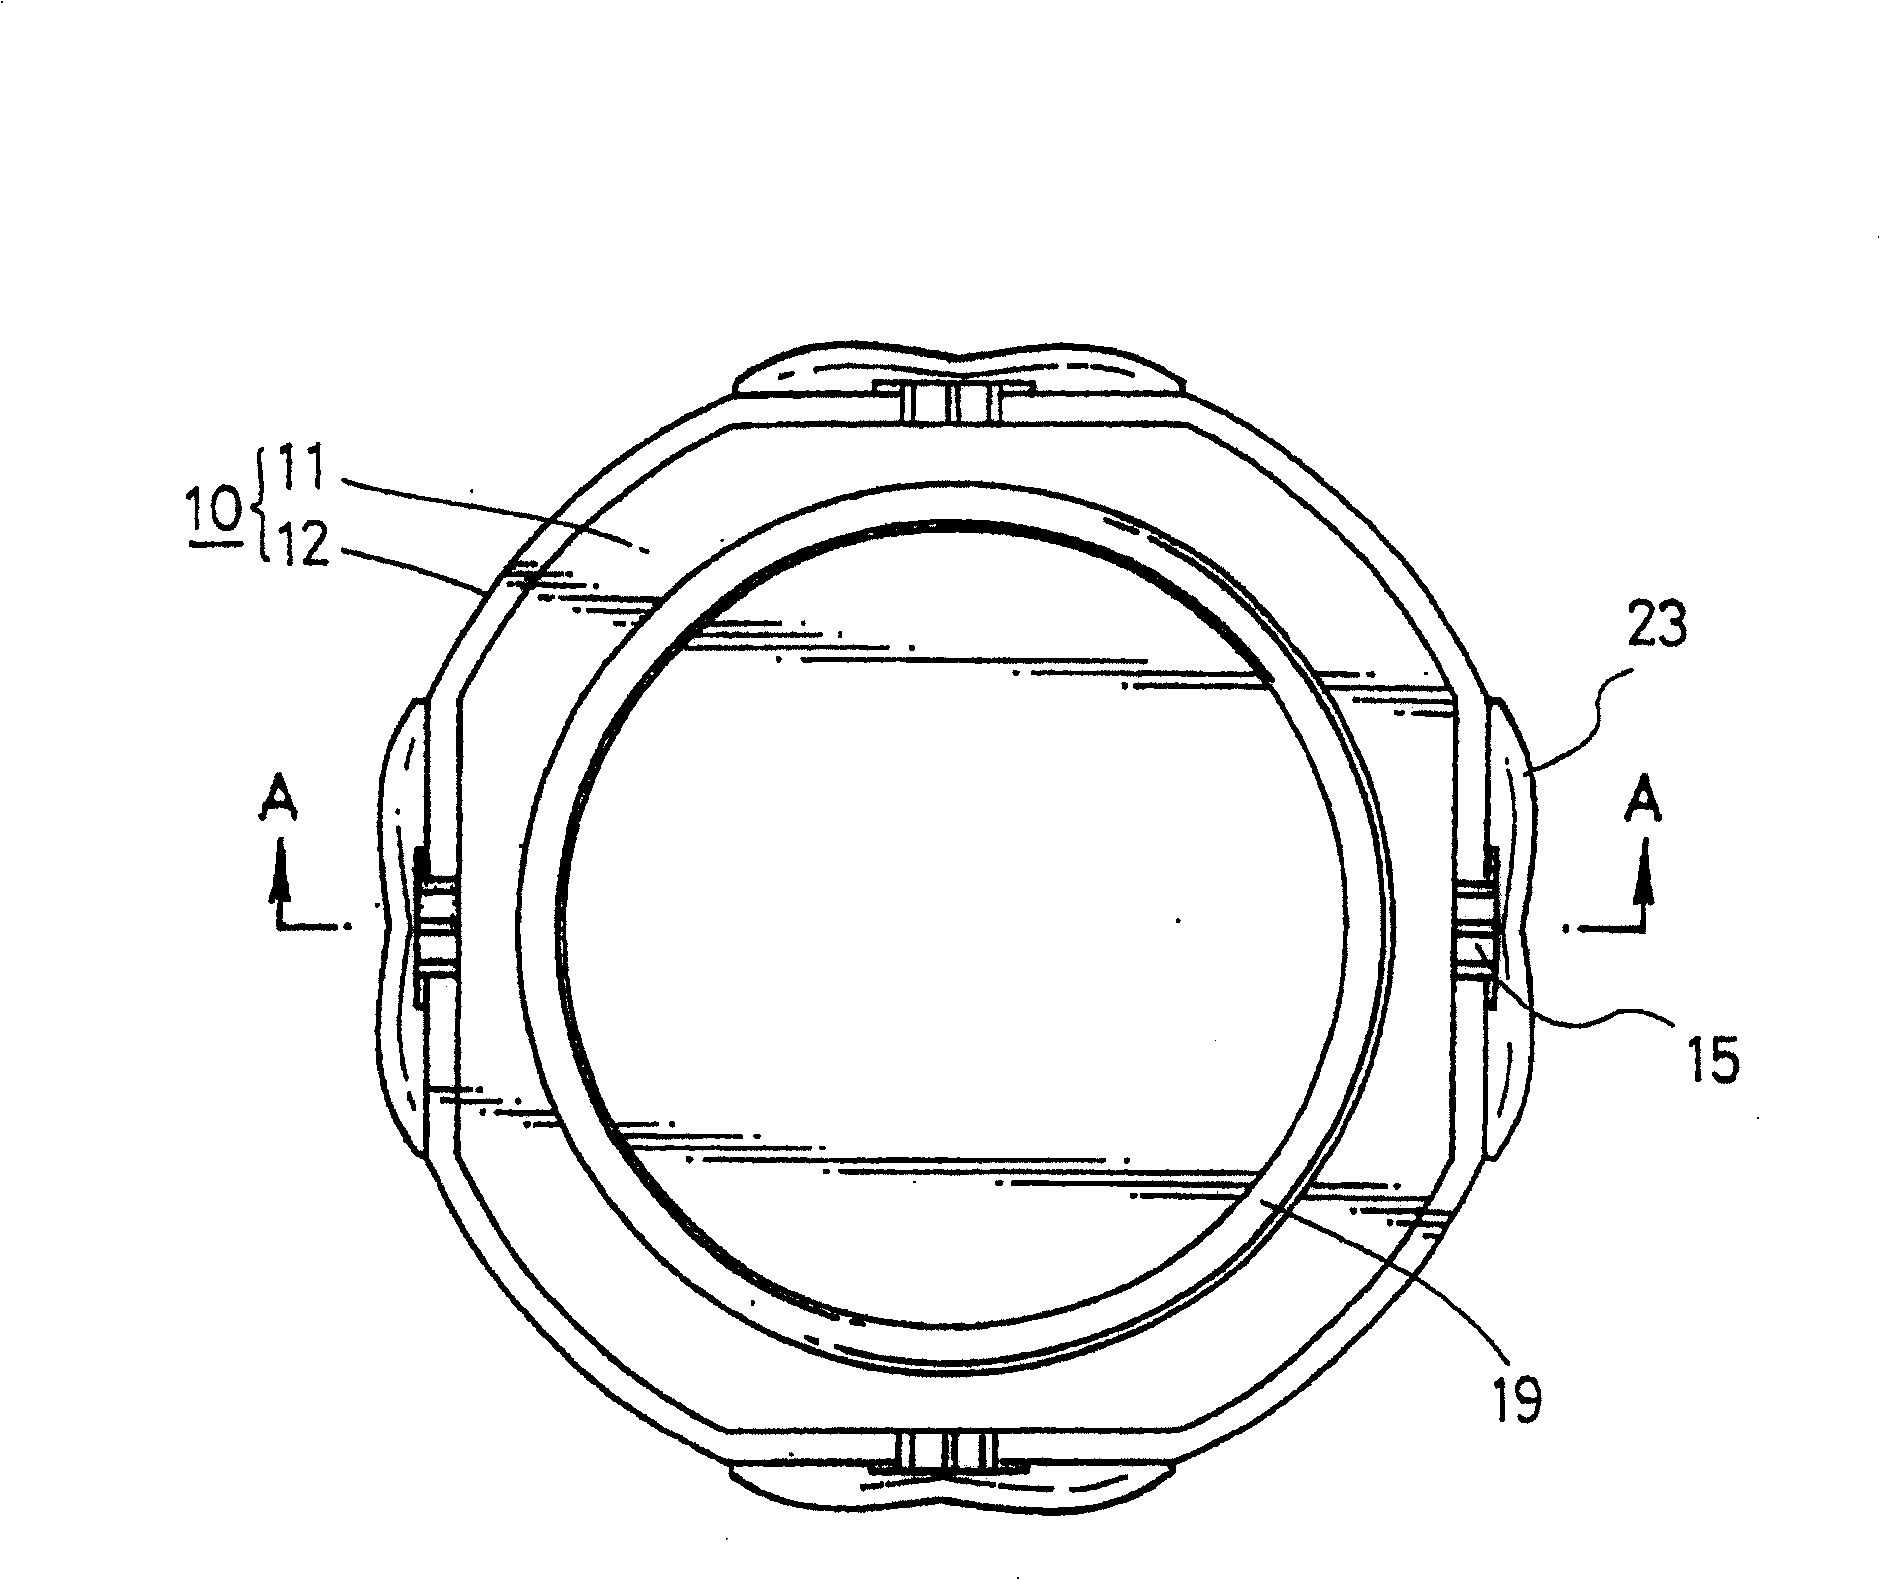 Multi-layered container with intermediate lid